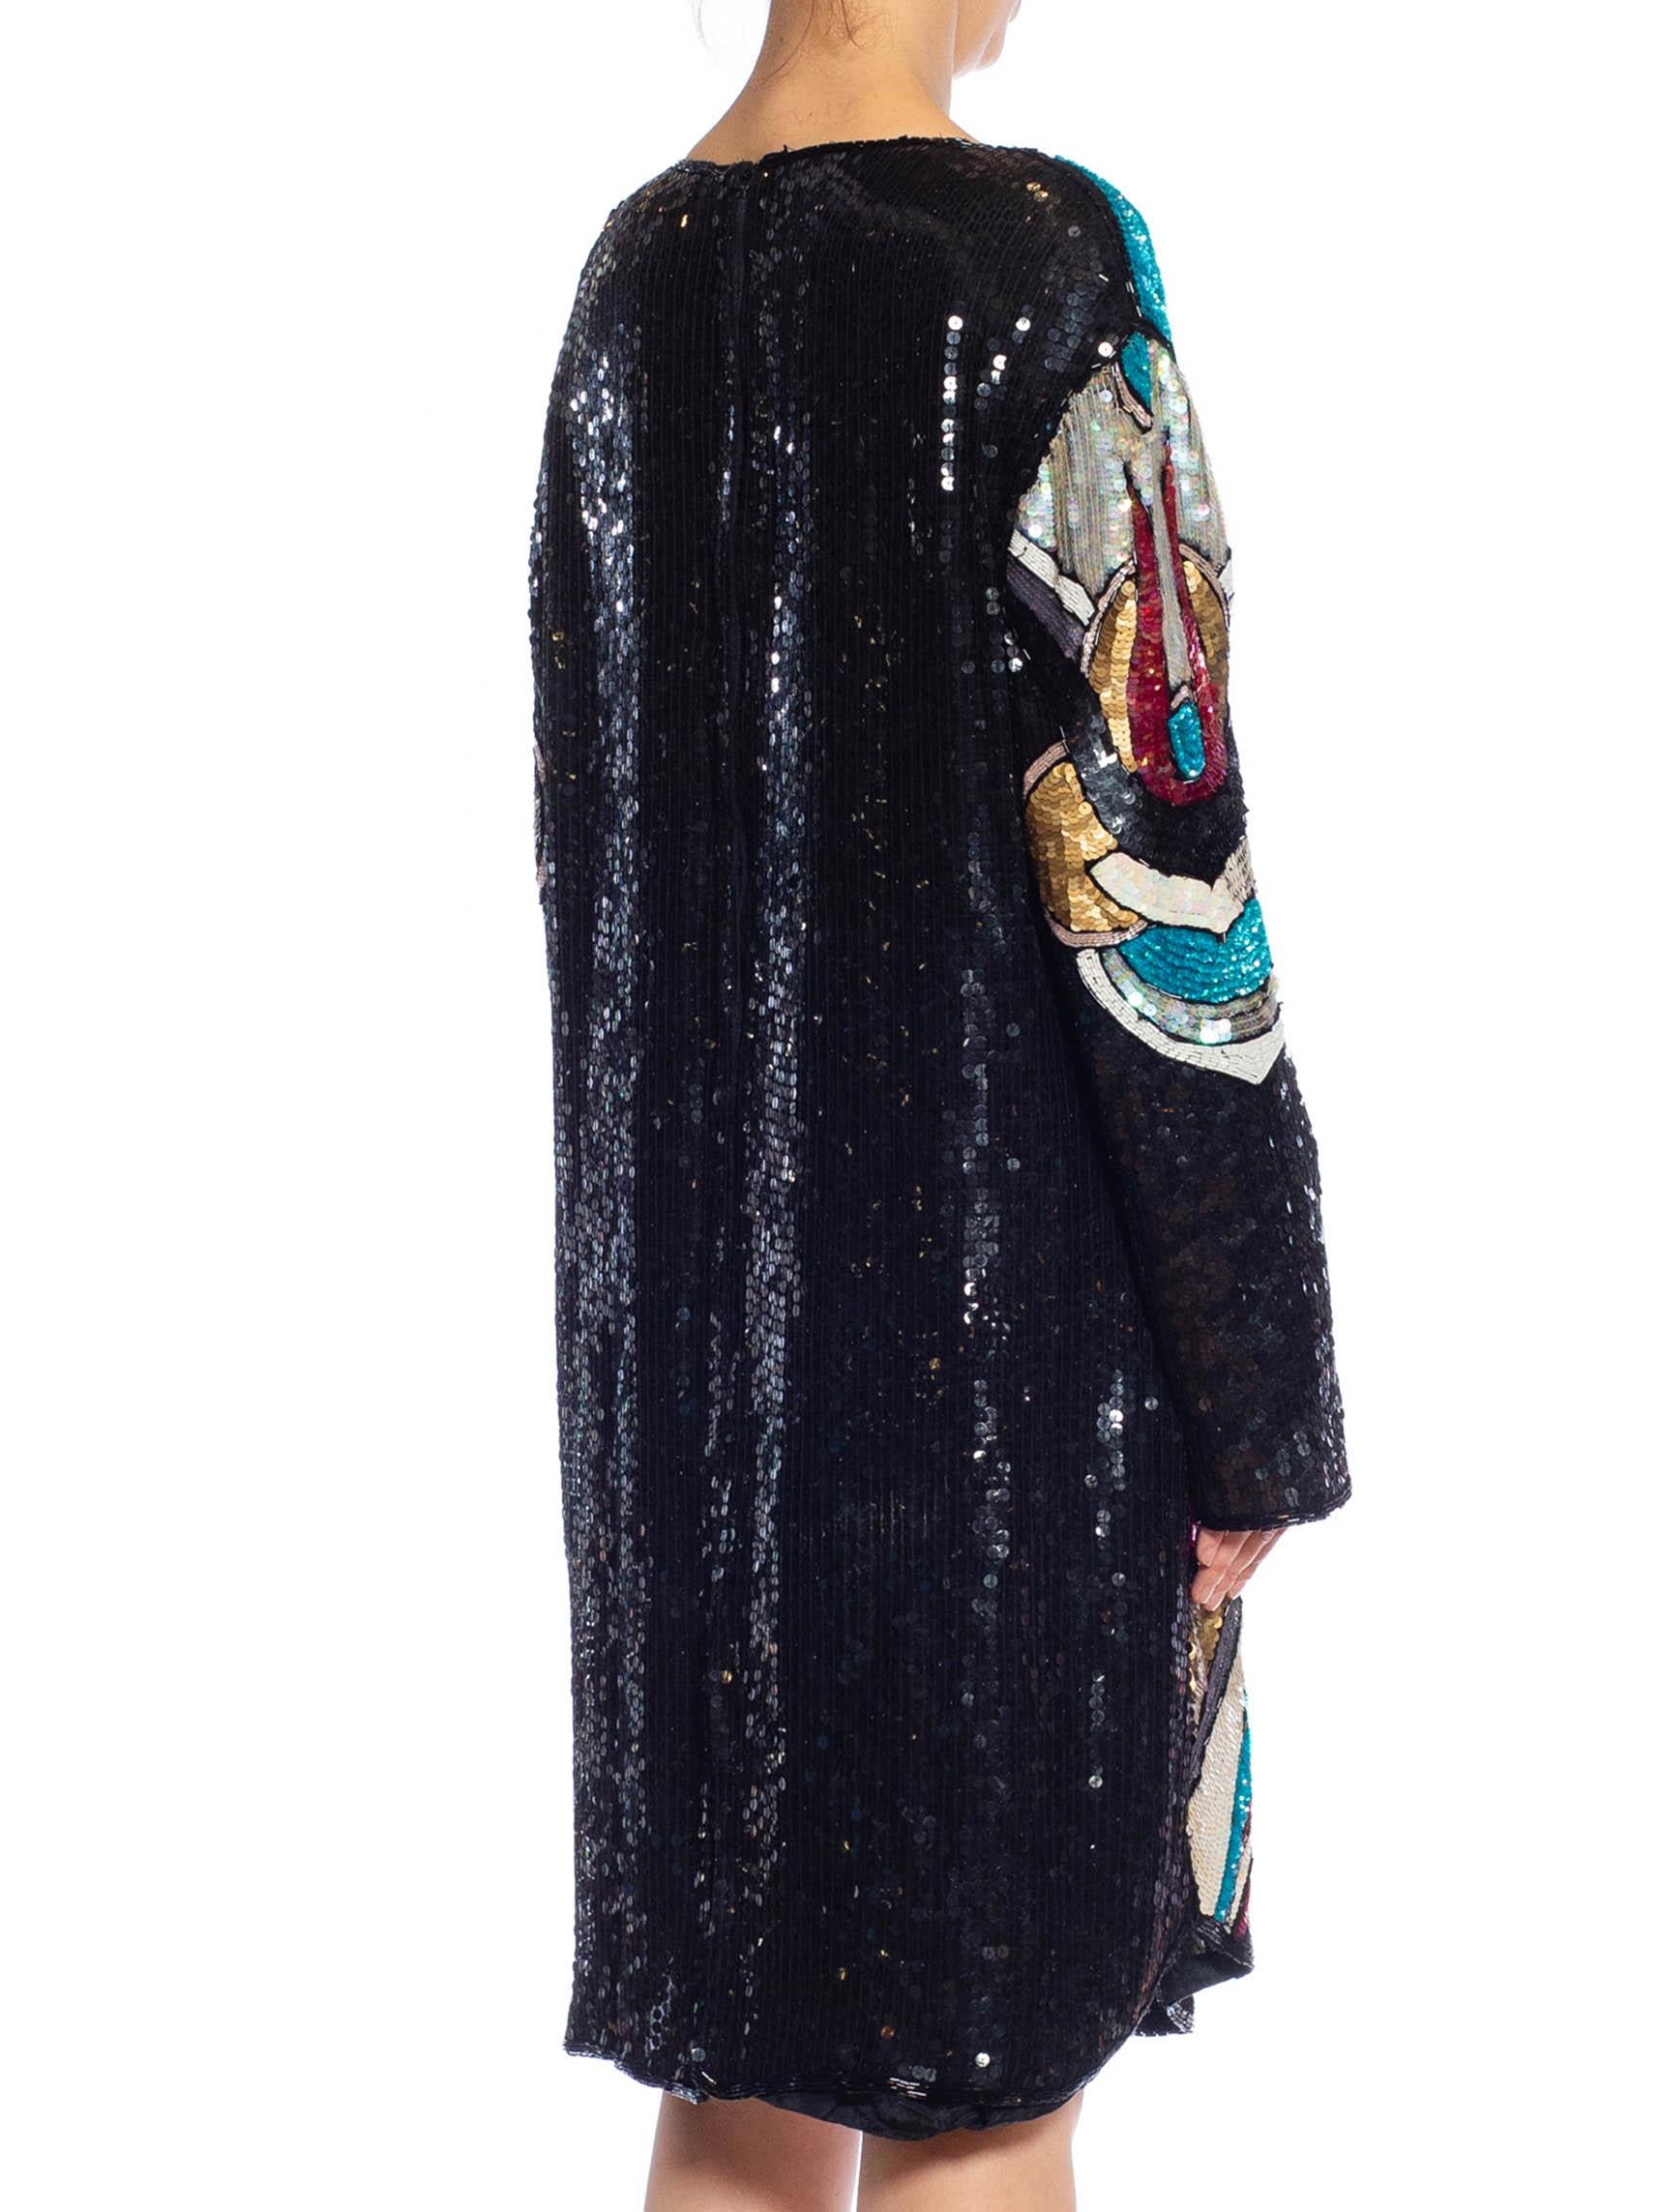 1980S Black & White Multicolored Beaded Silk Abstract Art Cocktail Dress For Sale 4